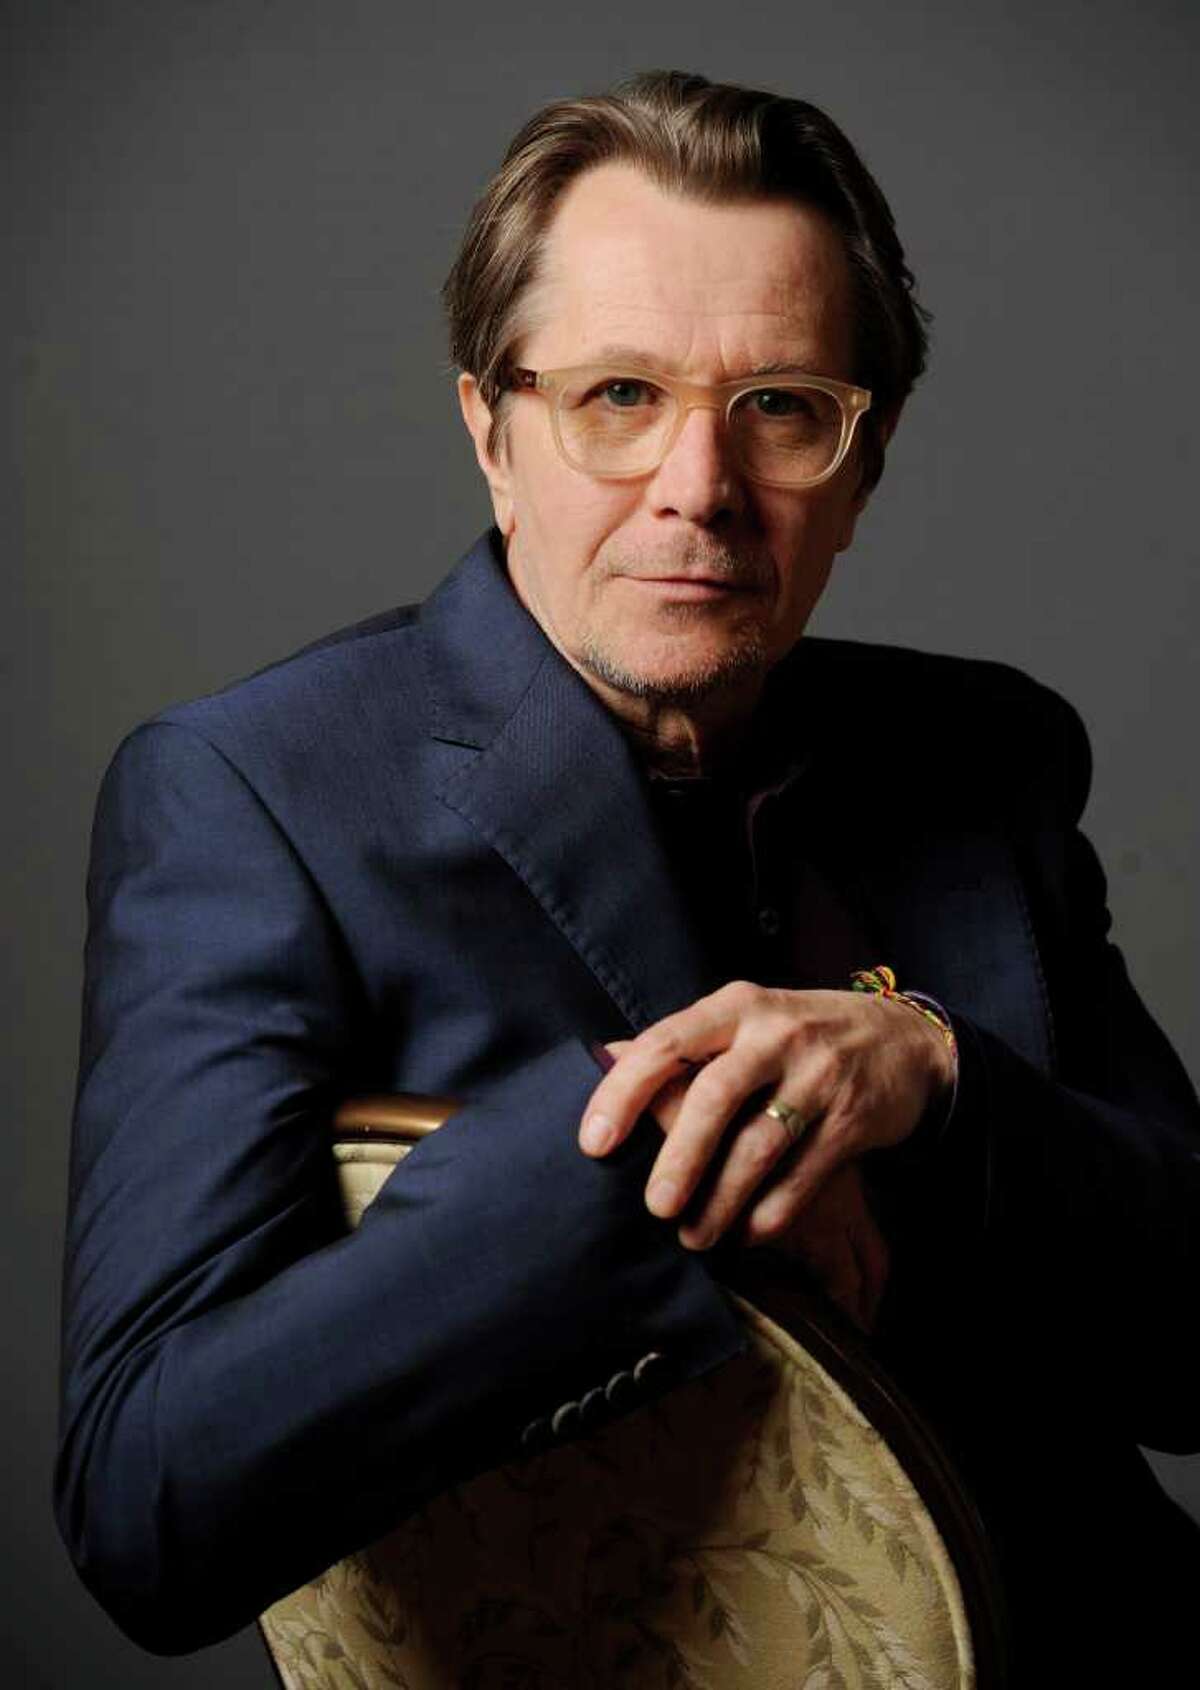 Actor Gary Oldman, a cast member in the espionage film "Tinker Tailor Soldier Spy," poses for a portrait in Beverly Hills, Calif., Monday, Dec. 5, 2011. (AP Photo/Chris Pizzello)